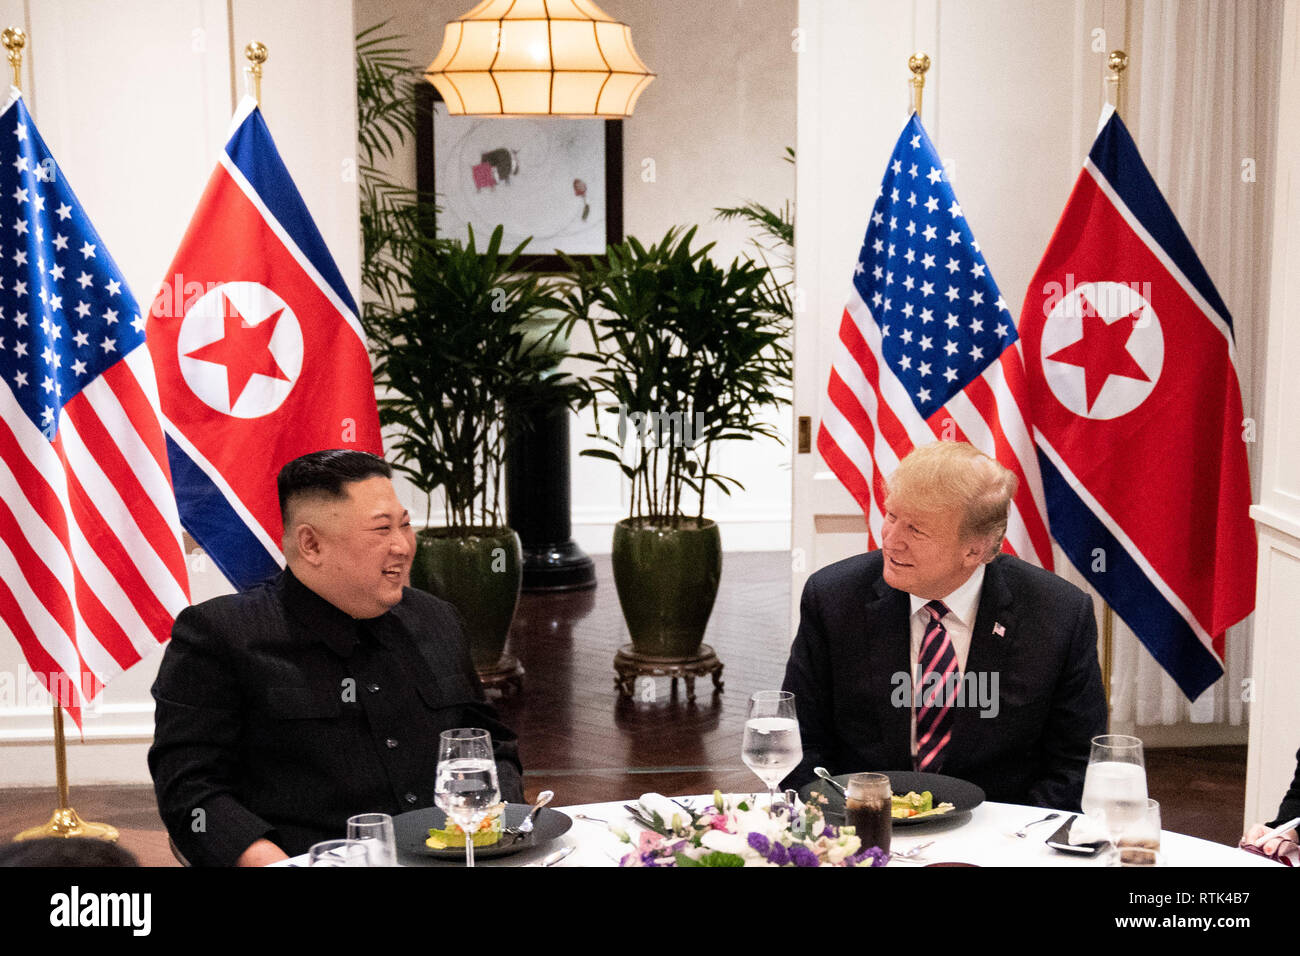 President Donald J. Trump and Kim Jong Un, Chairman of the State Affairs Commission of the Democratic PeopleÕs Republic of Korea, meet for a social dinner Wednesday, Feb. 27, 2019, at the Sofitel Legend Metropole hotel in Hanoi, for their second summit   People:  President Donald Trump, Kim Jong Un Stock Photo